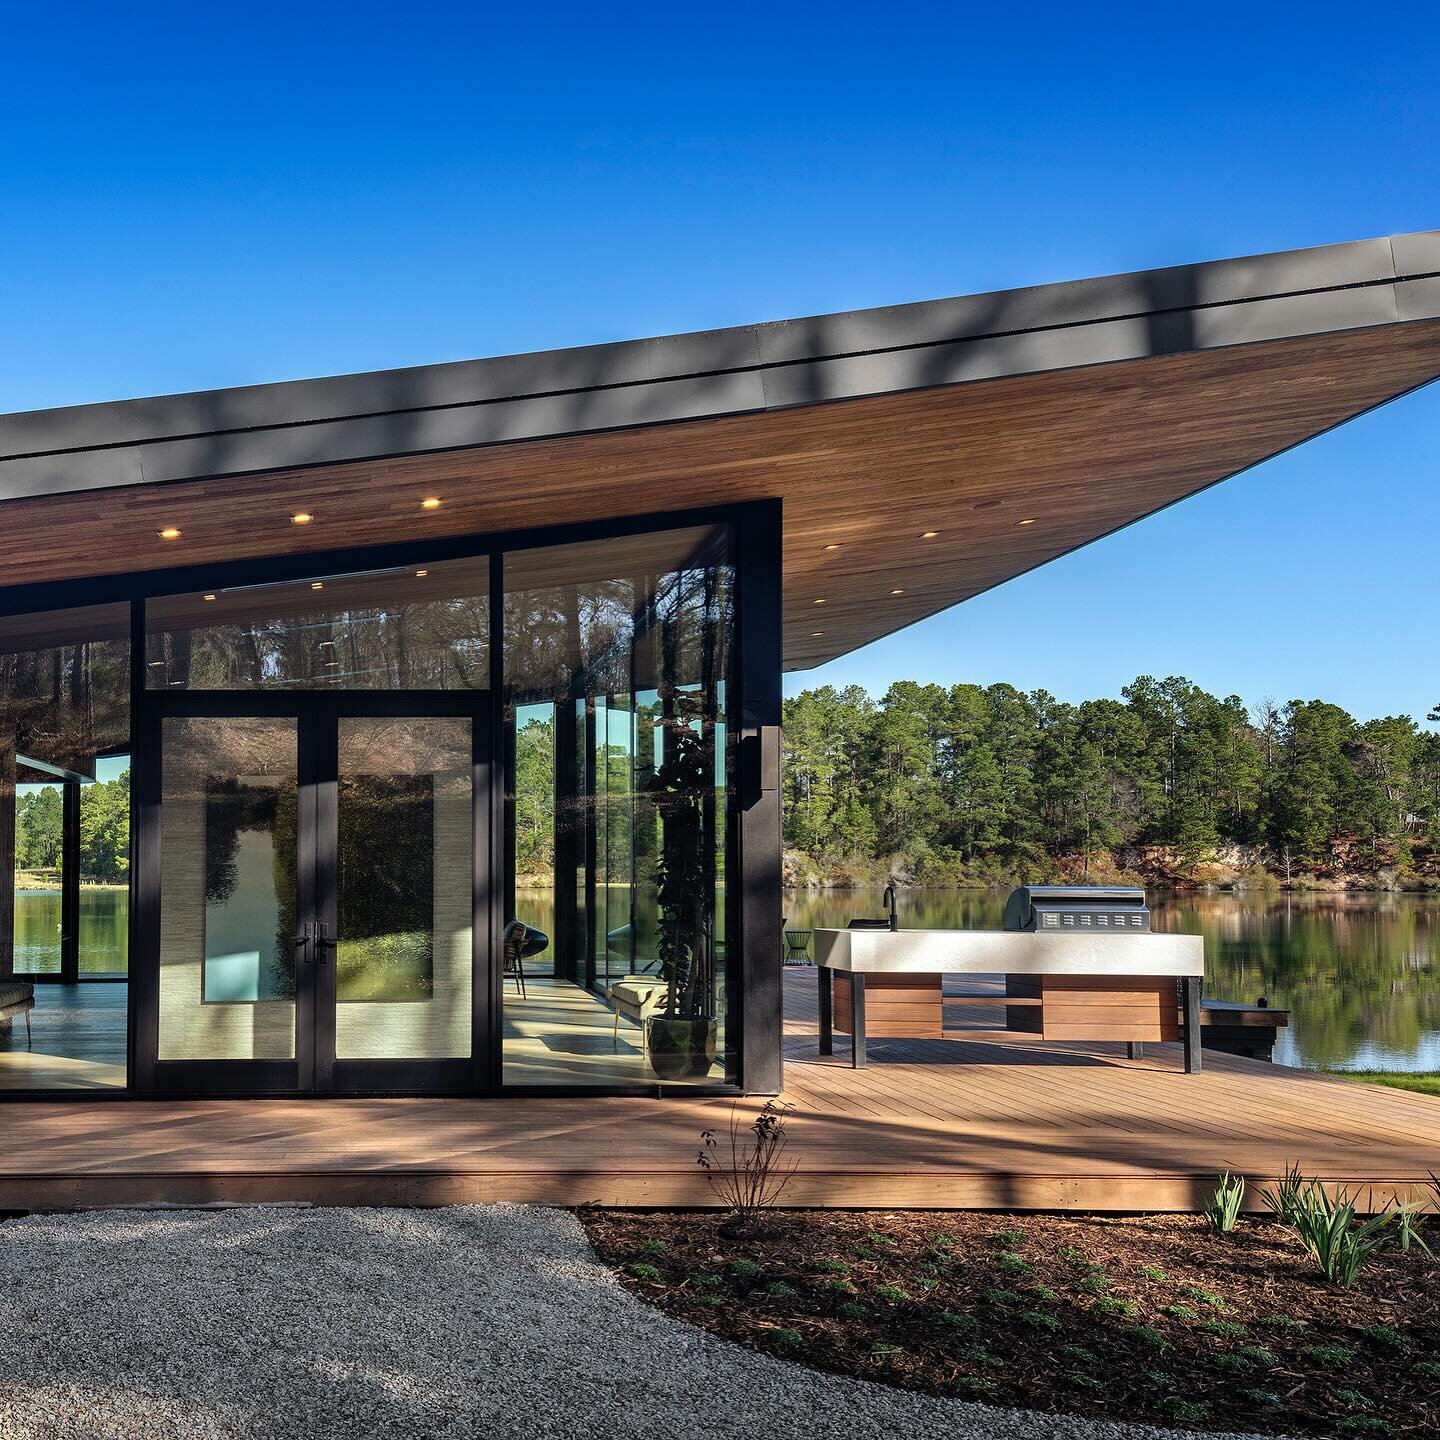 The Riverside Lake House sits on the edge of a private, crystal clear, limestone quarry lake. To reduce size and impact, an existing structure was re-purposed as guest quarters allowing the new pavilion to be located on a rock outcropping at the wate